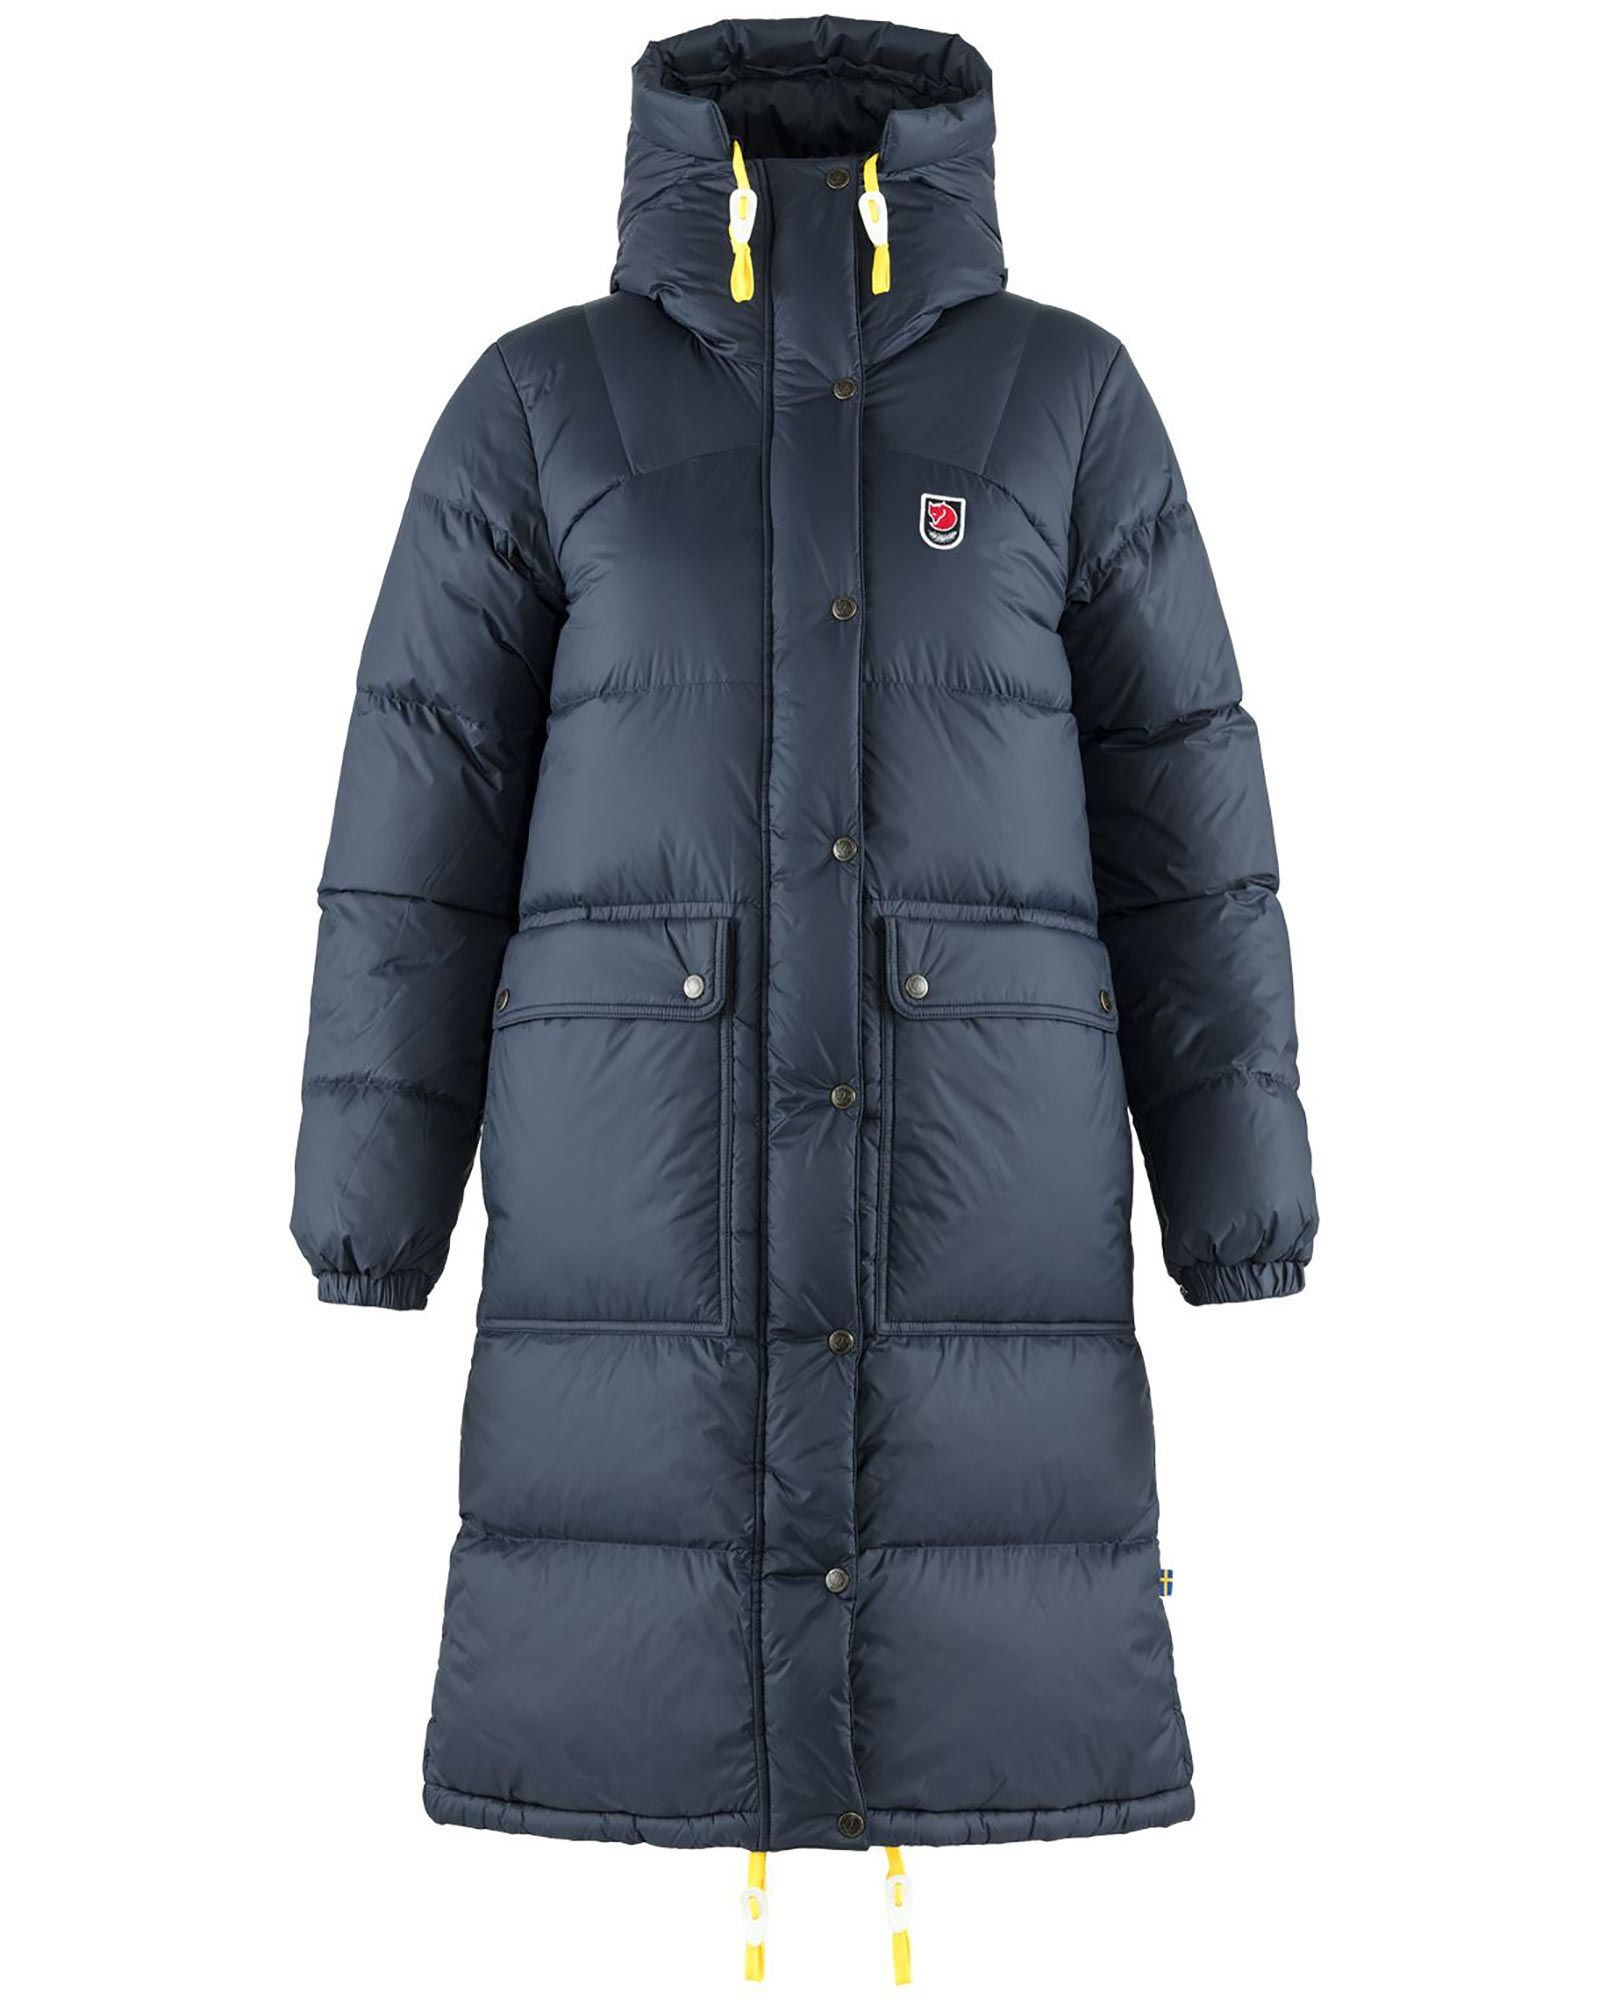 Fjallraven Expedition Long Down Women’s Parka Jacket - Navy S